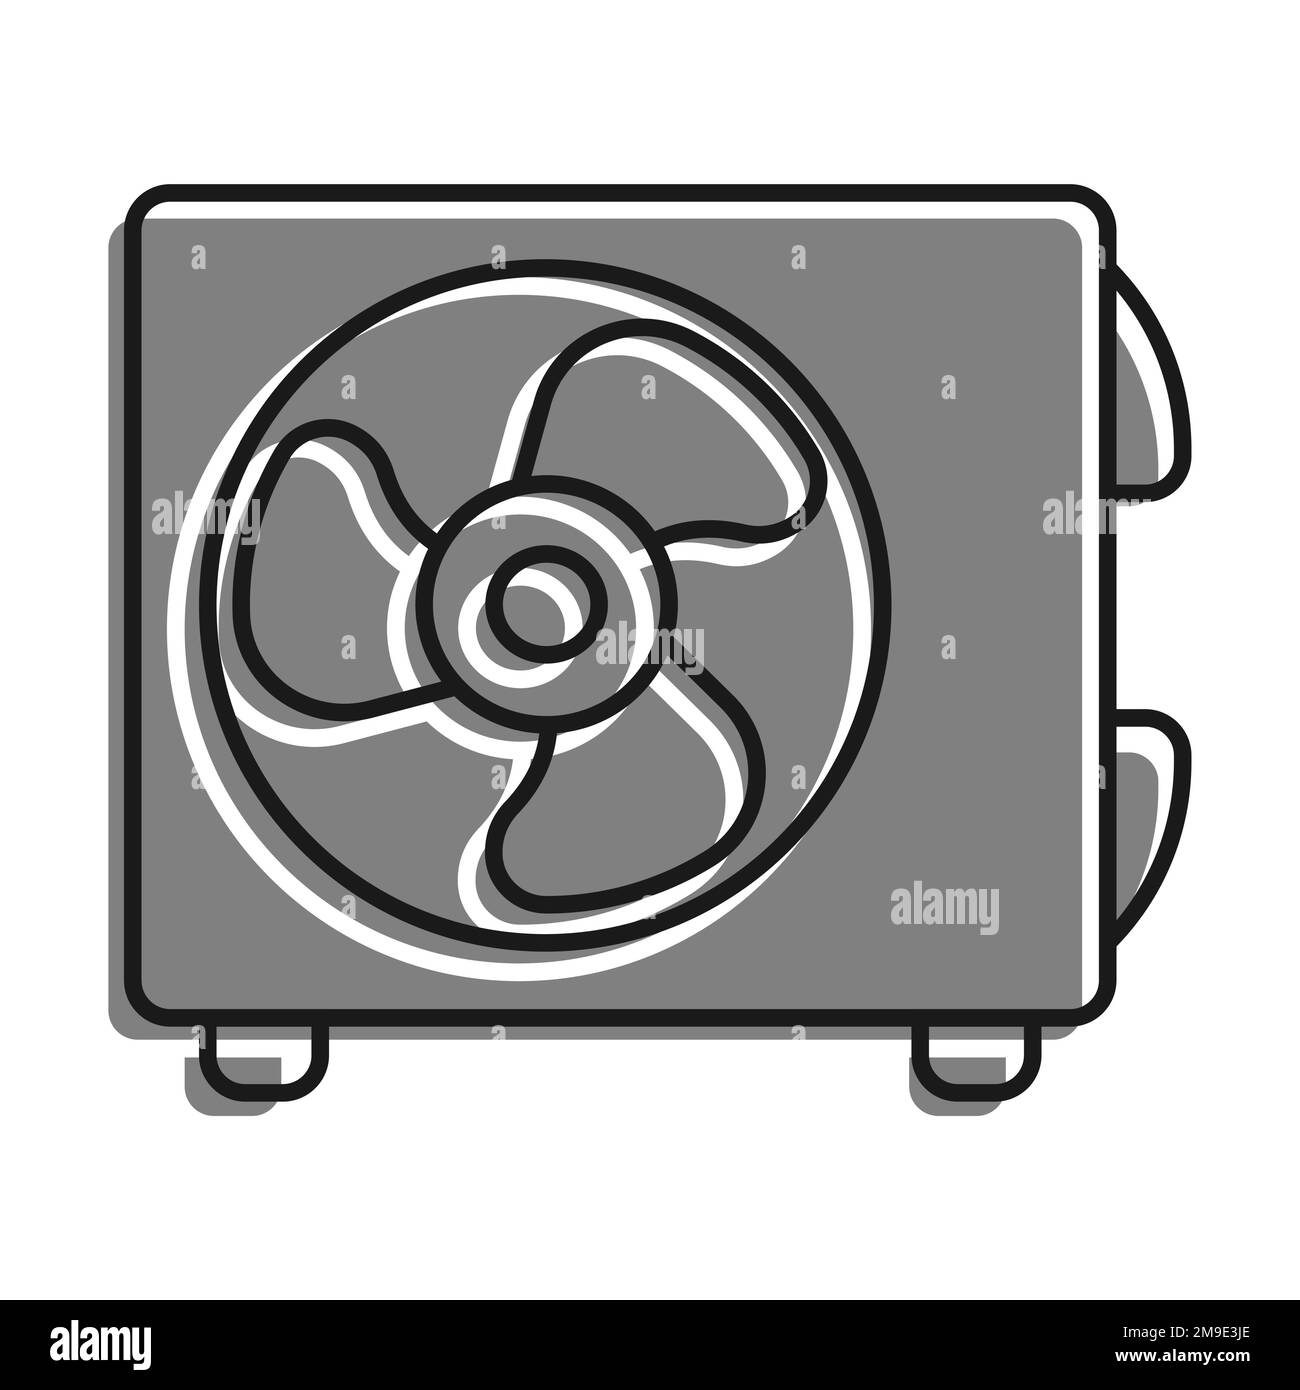 Linear filled with gray color icon. Air Conditioner Unit With Three Bladed Fan. Room Cooling And Heating. Maintaining Comfortable Temperature In Offic Stock Vector